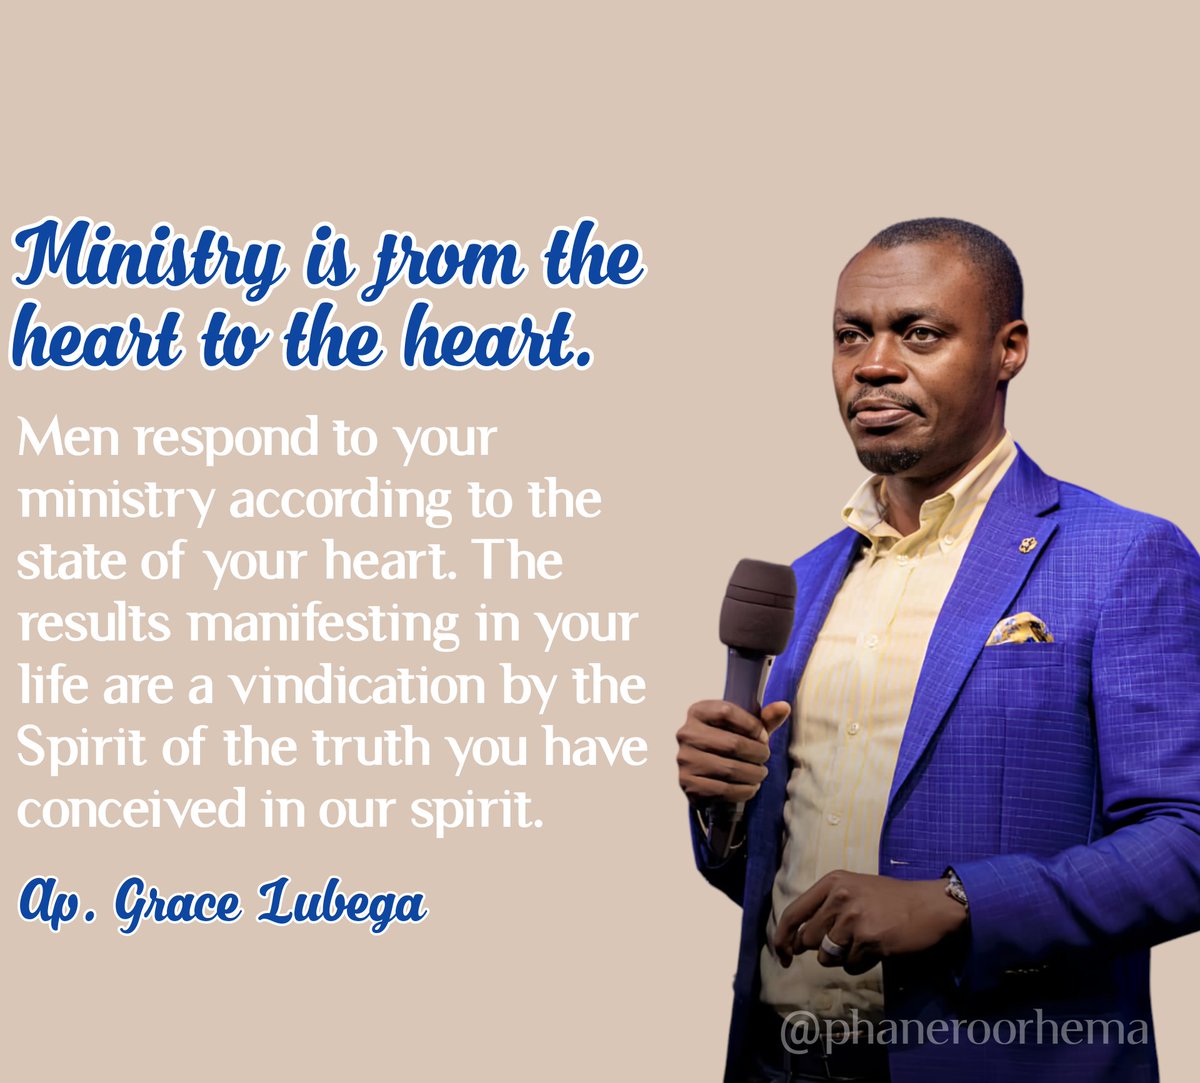 Ministry is from the heart to the heart.

Men respond to your ministry according to the state of your heart. The results manifesting in your life are a vindication by the Spirit of the truth you have conceived in our spirit. 

Ap. Grace Lubega
#PhanerooRhema 
#MyGreatPriceVI